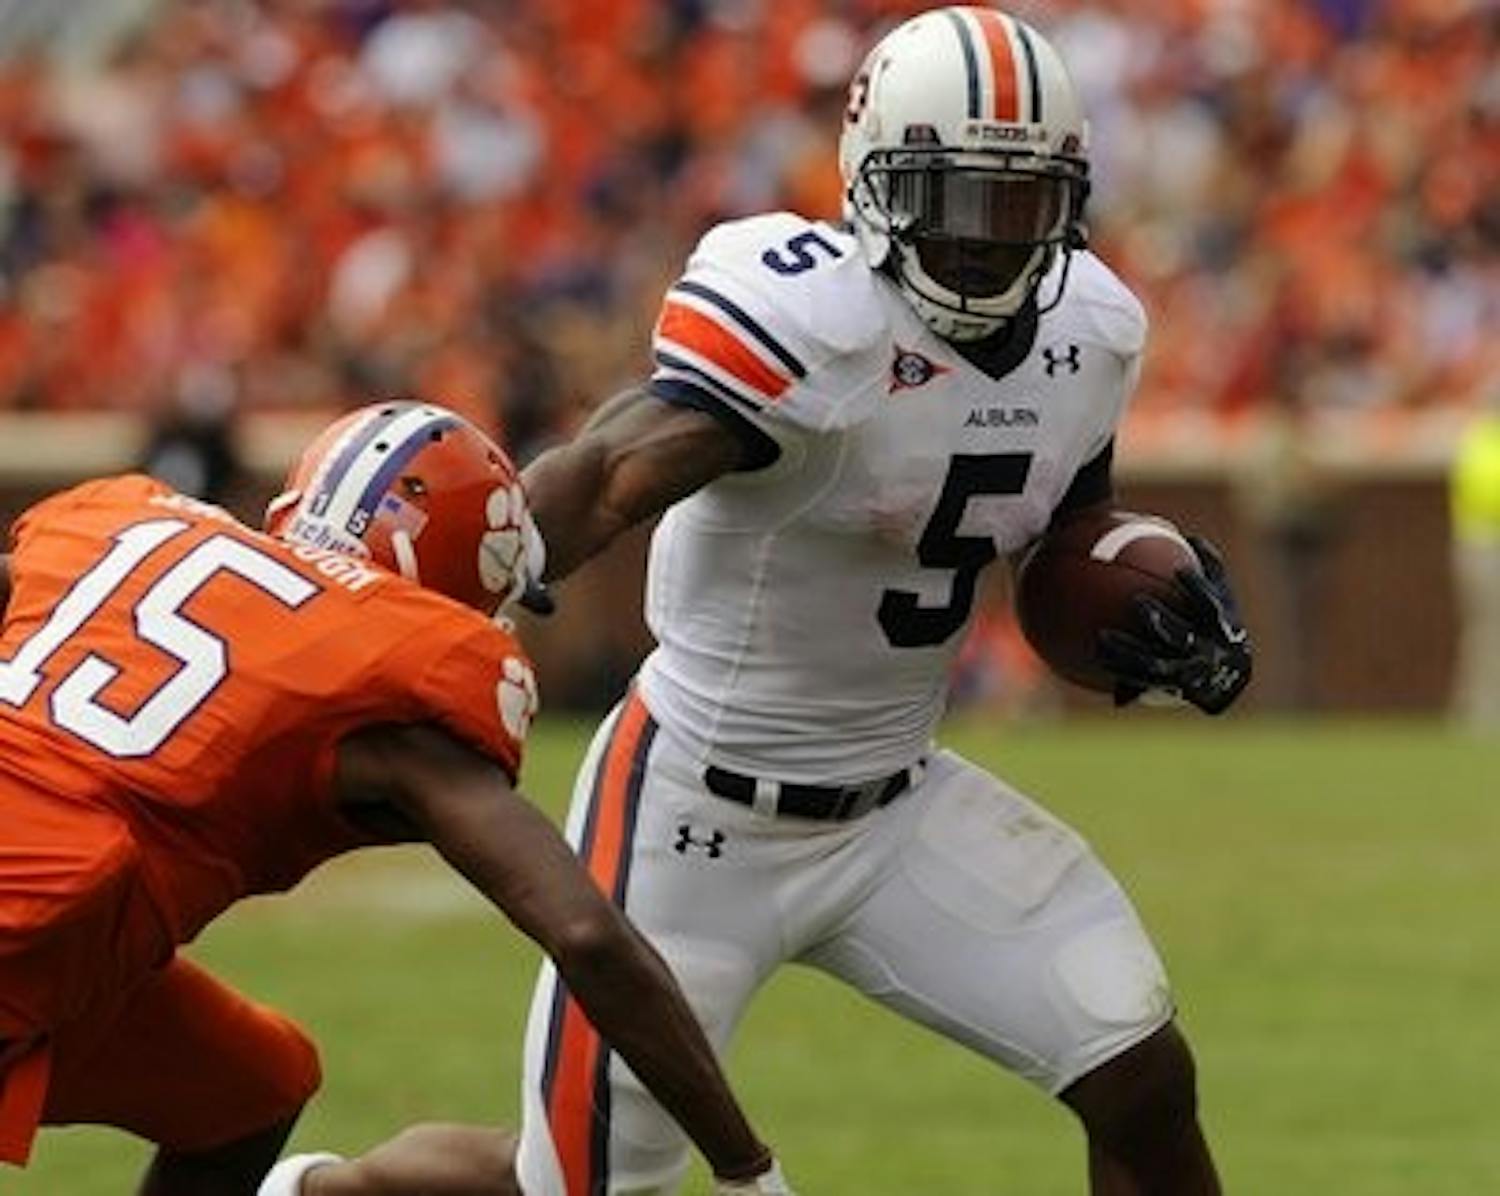 Running back Michael Dyer sprints from an opposing Tiger at Saturday's game. (Todd Van Emst / AUBURN MEDIA RELATIONS)